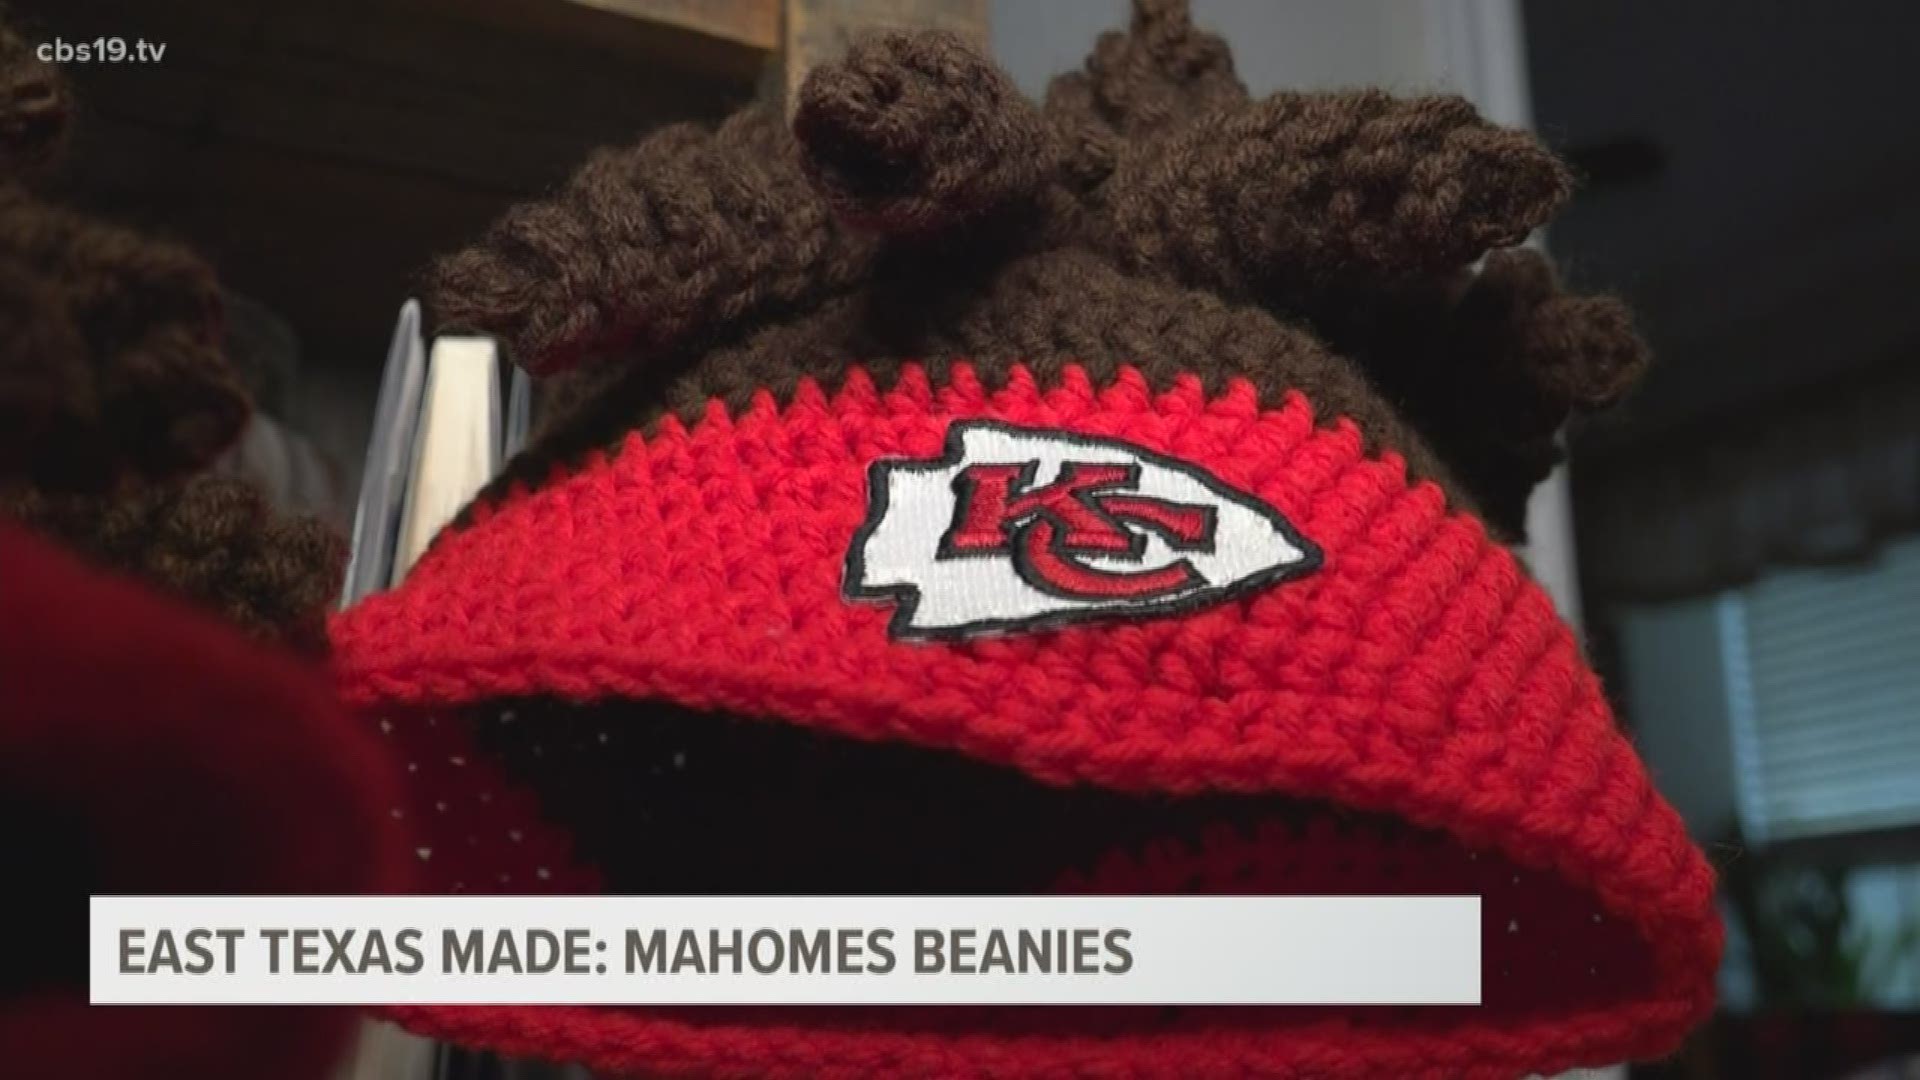 The hats are designed to look like Mahomes’ hair coming out of the top of his trademark headband.